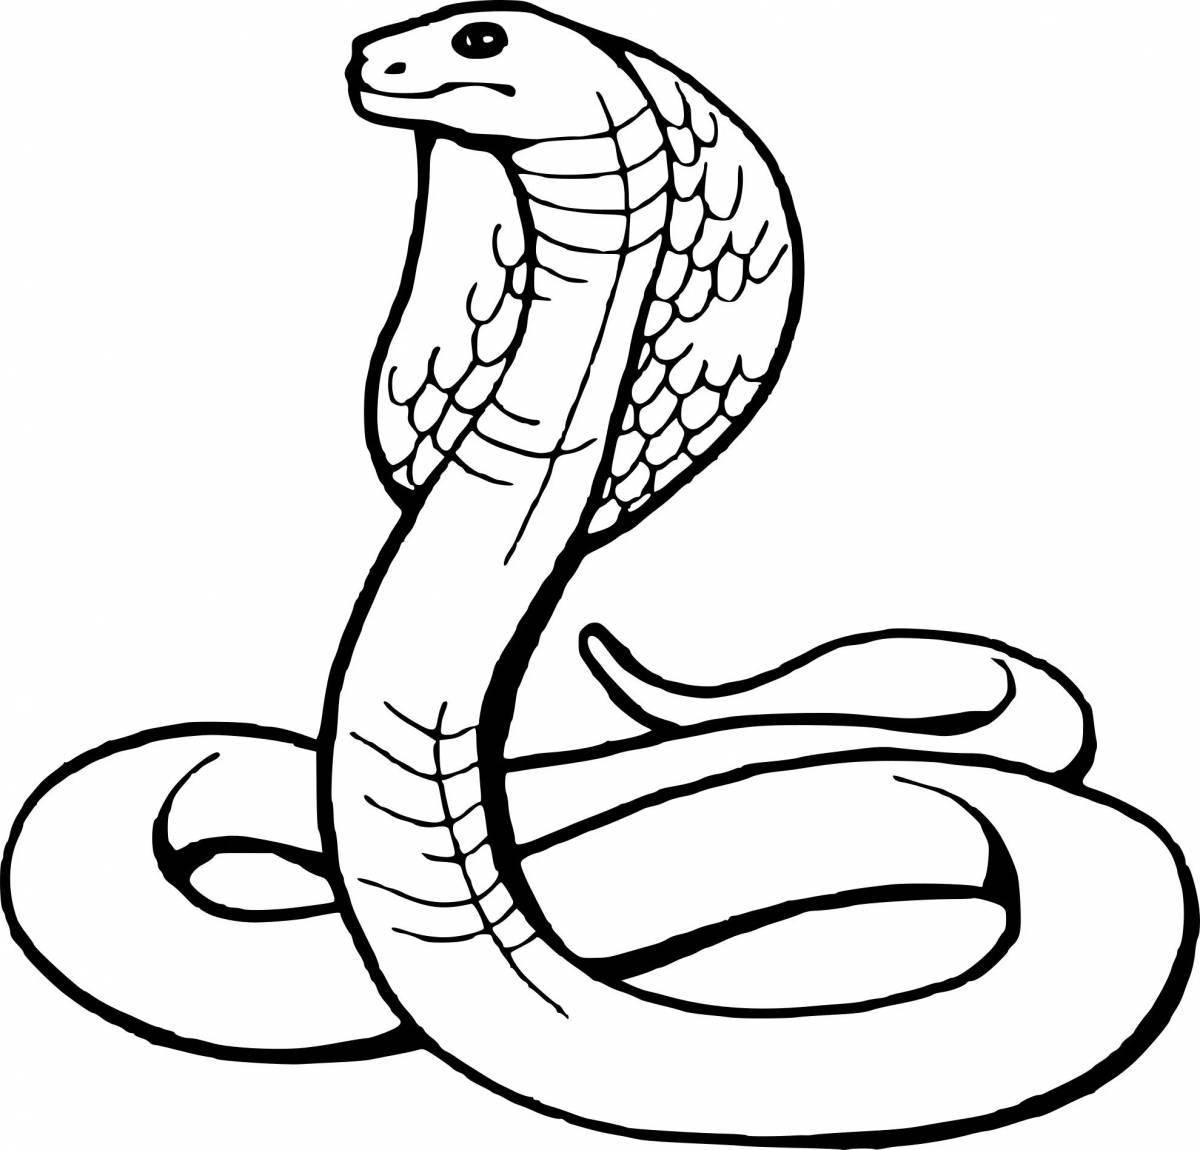 Spectacular snake coloring page